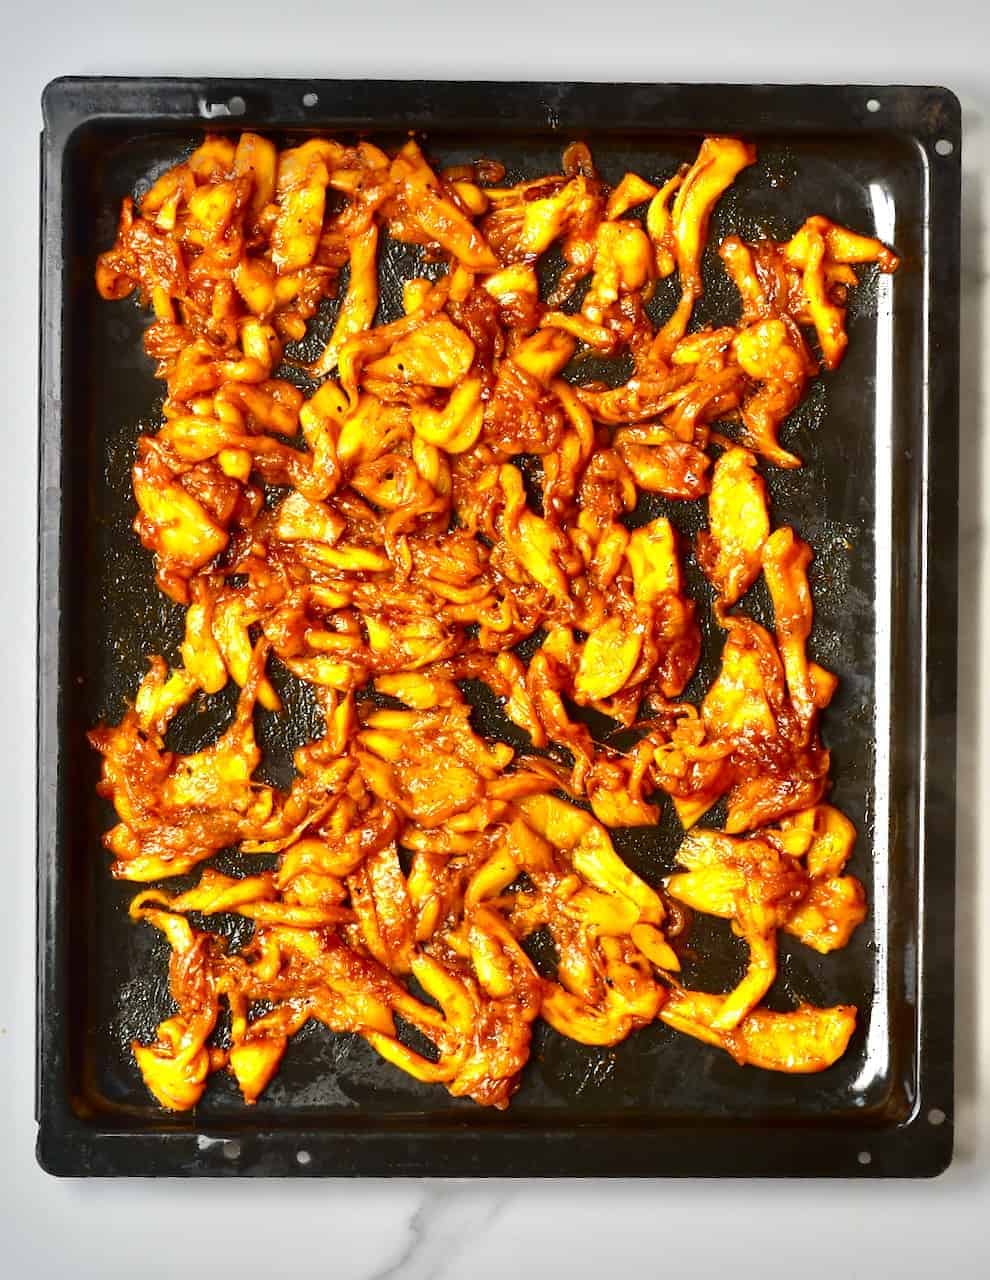 Cooked jackfruit on tray - delicious bbq pulled jackfruit recipe